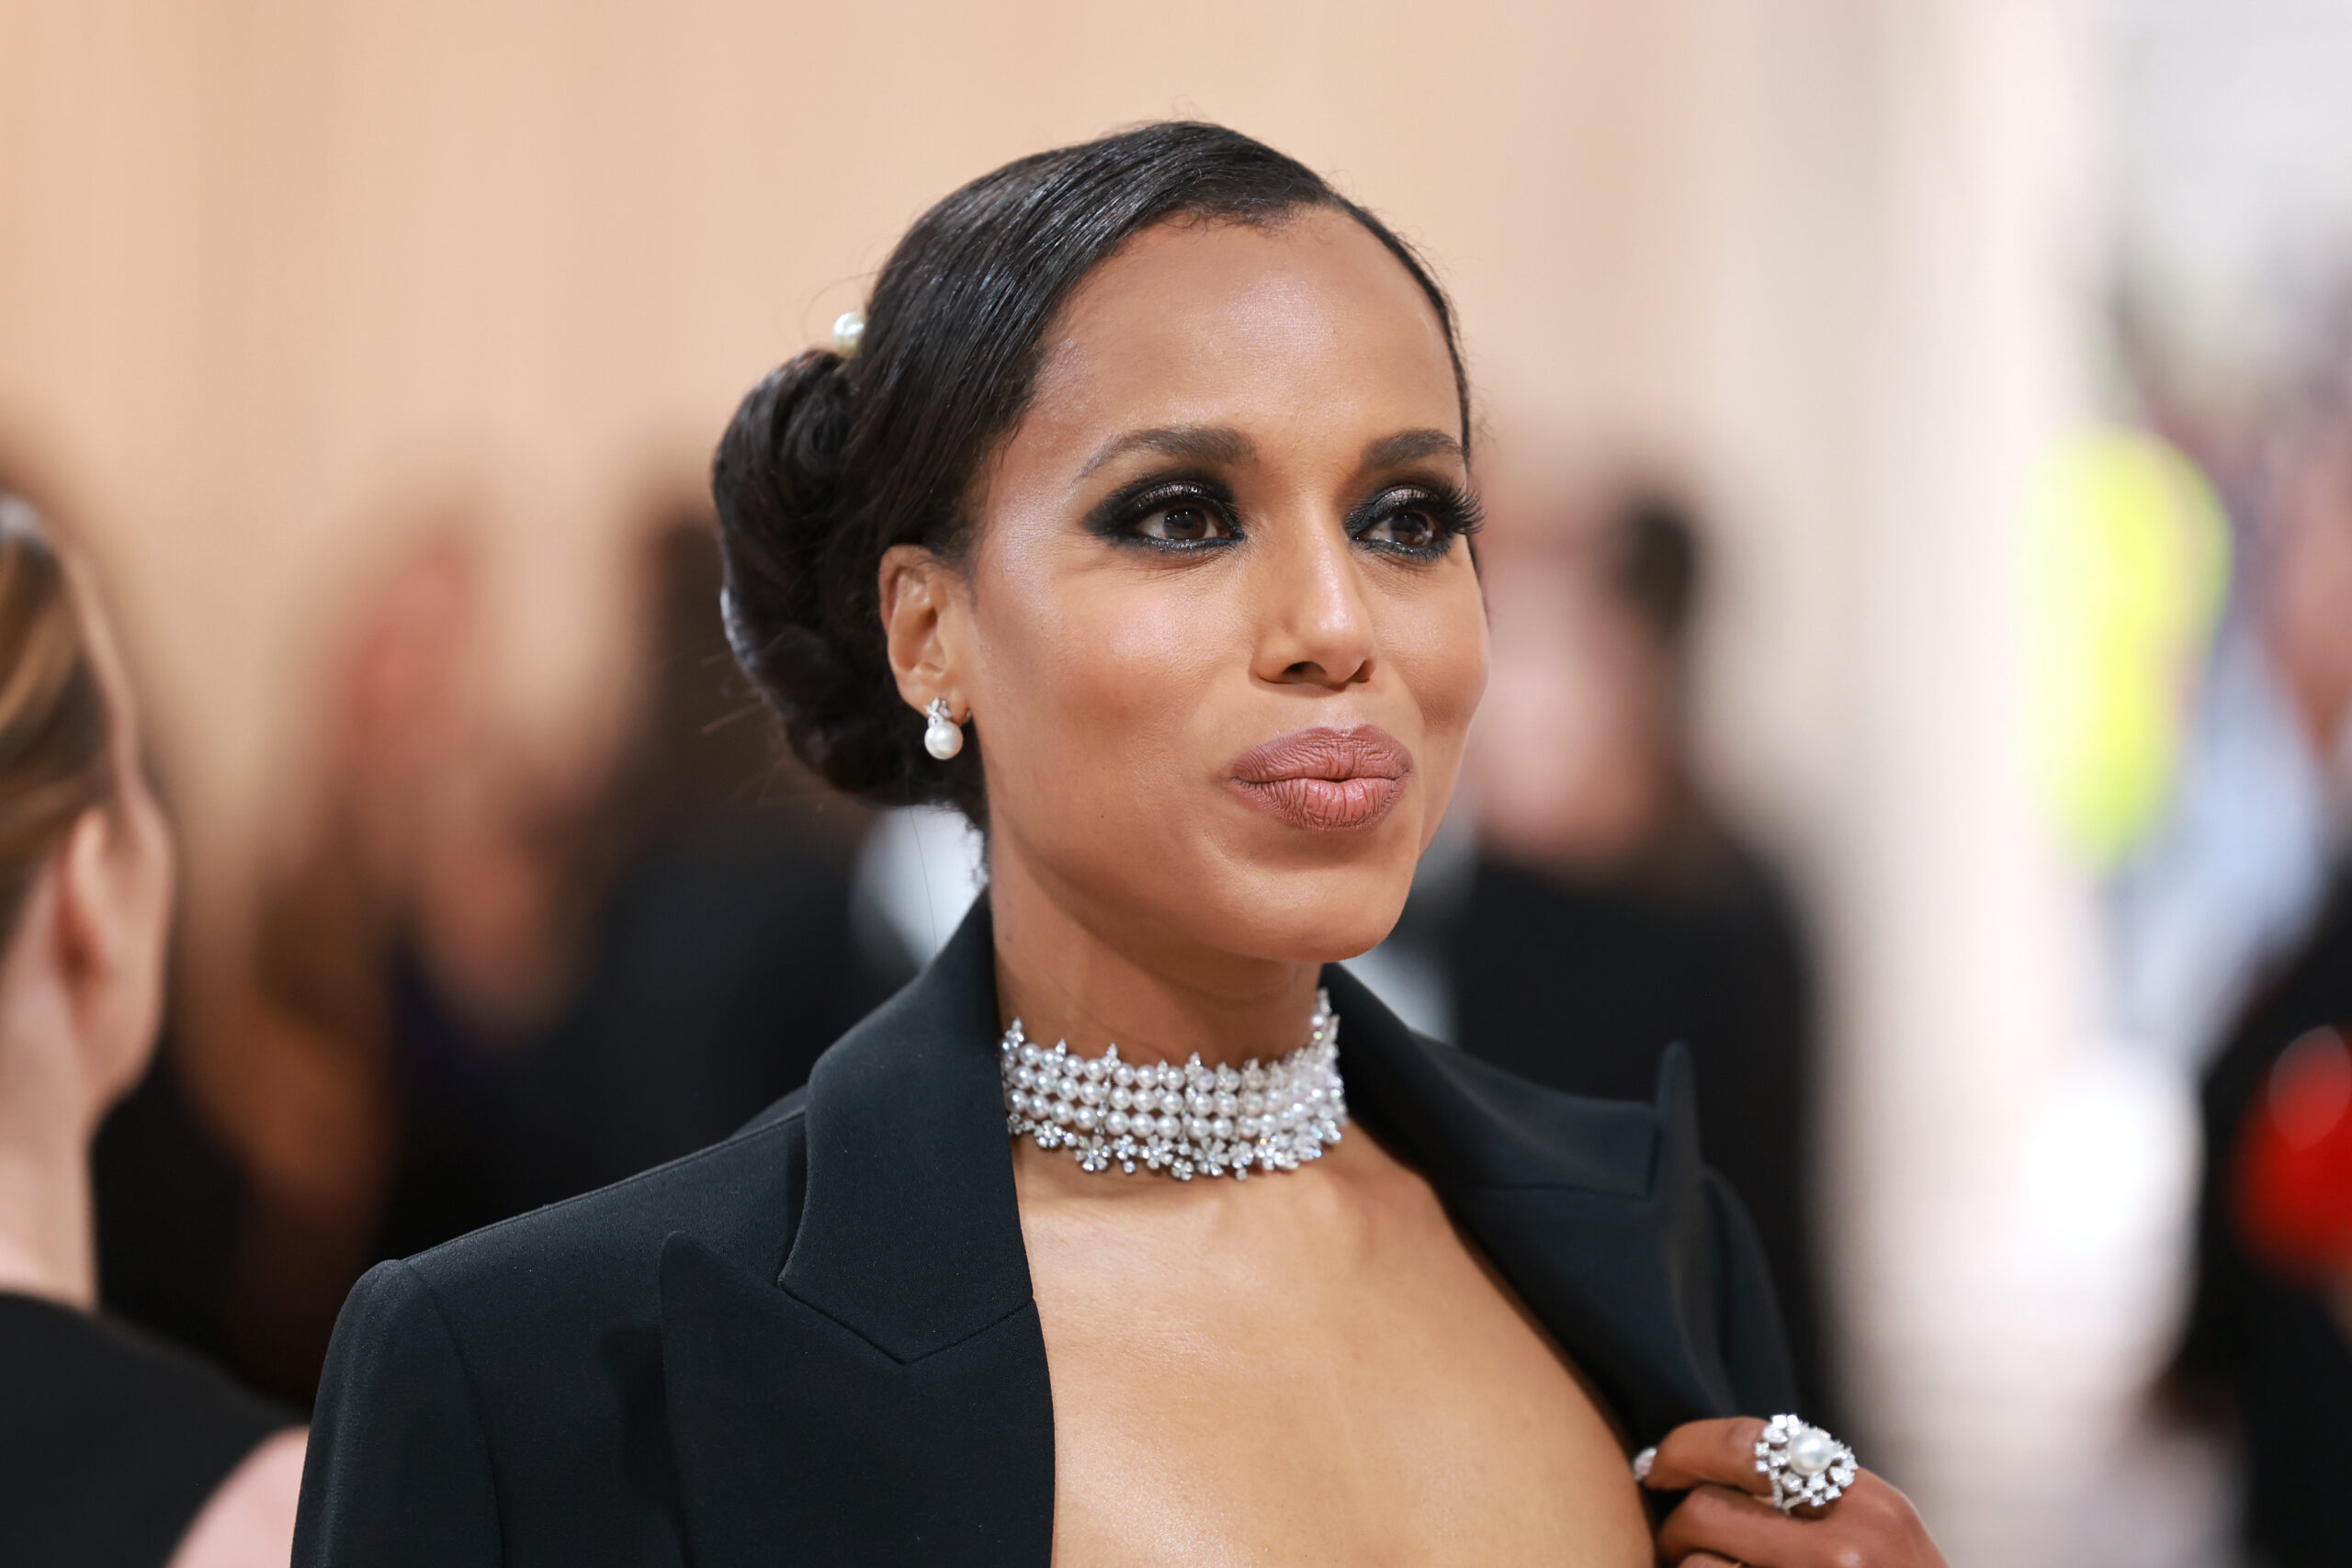 Kerry Washington Discloses Struggles With Thoughts of Suicide